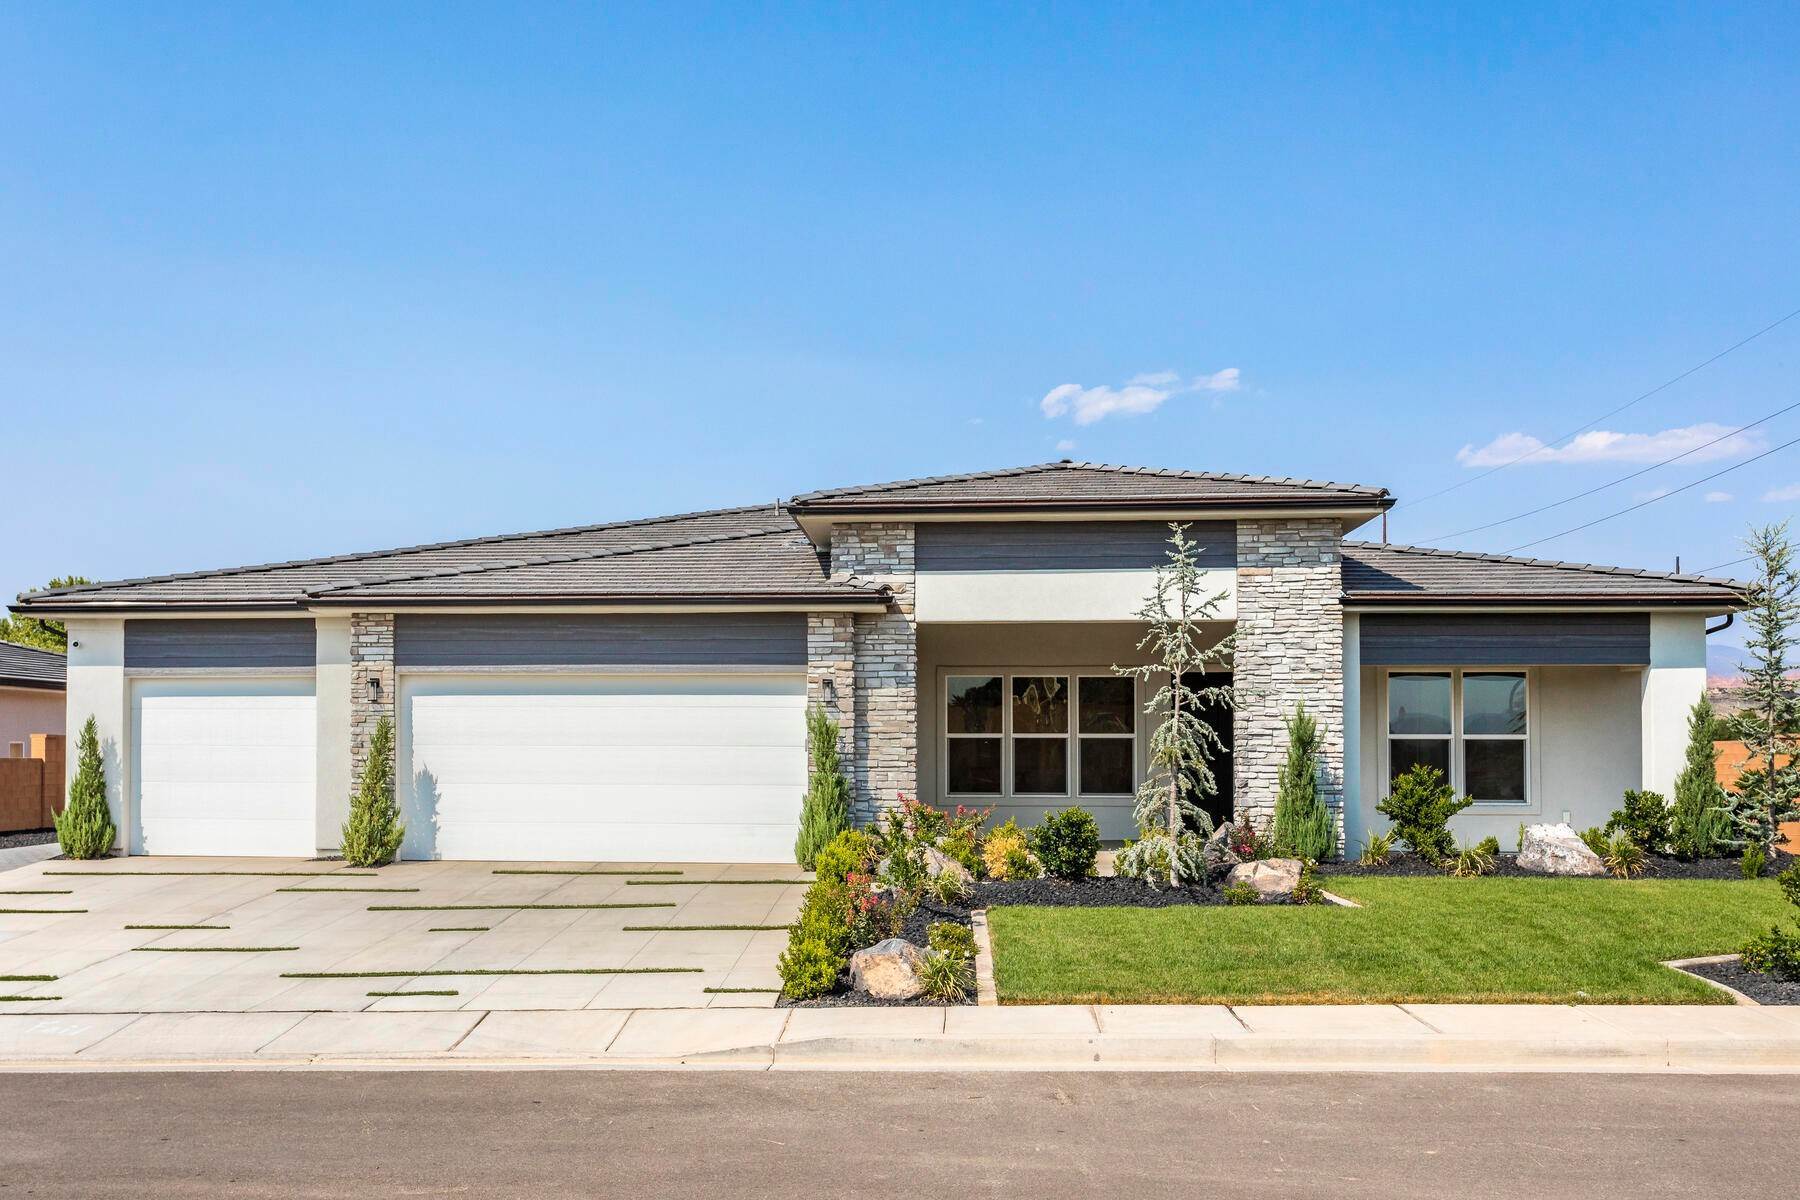 Single Family Homes for Sale at Welcome To Shooting Star, Up And Coming Subdivision In Washington Fields! 1592 E Black Brush Drive, Lot #73 Washington, Utah 84780 United States